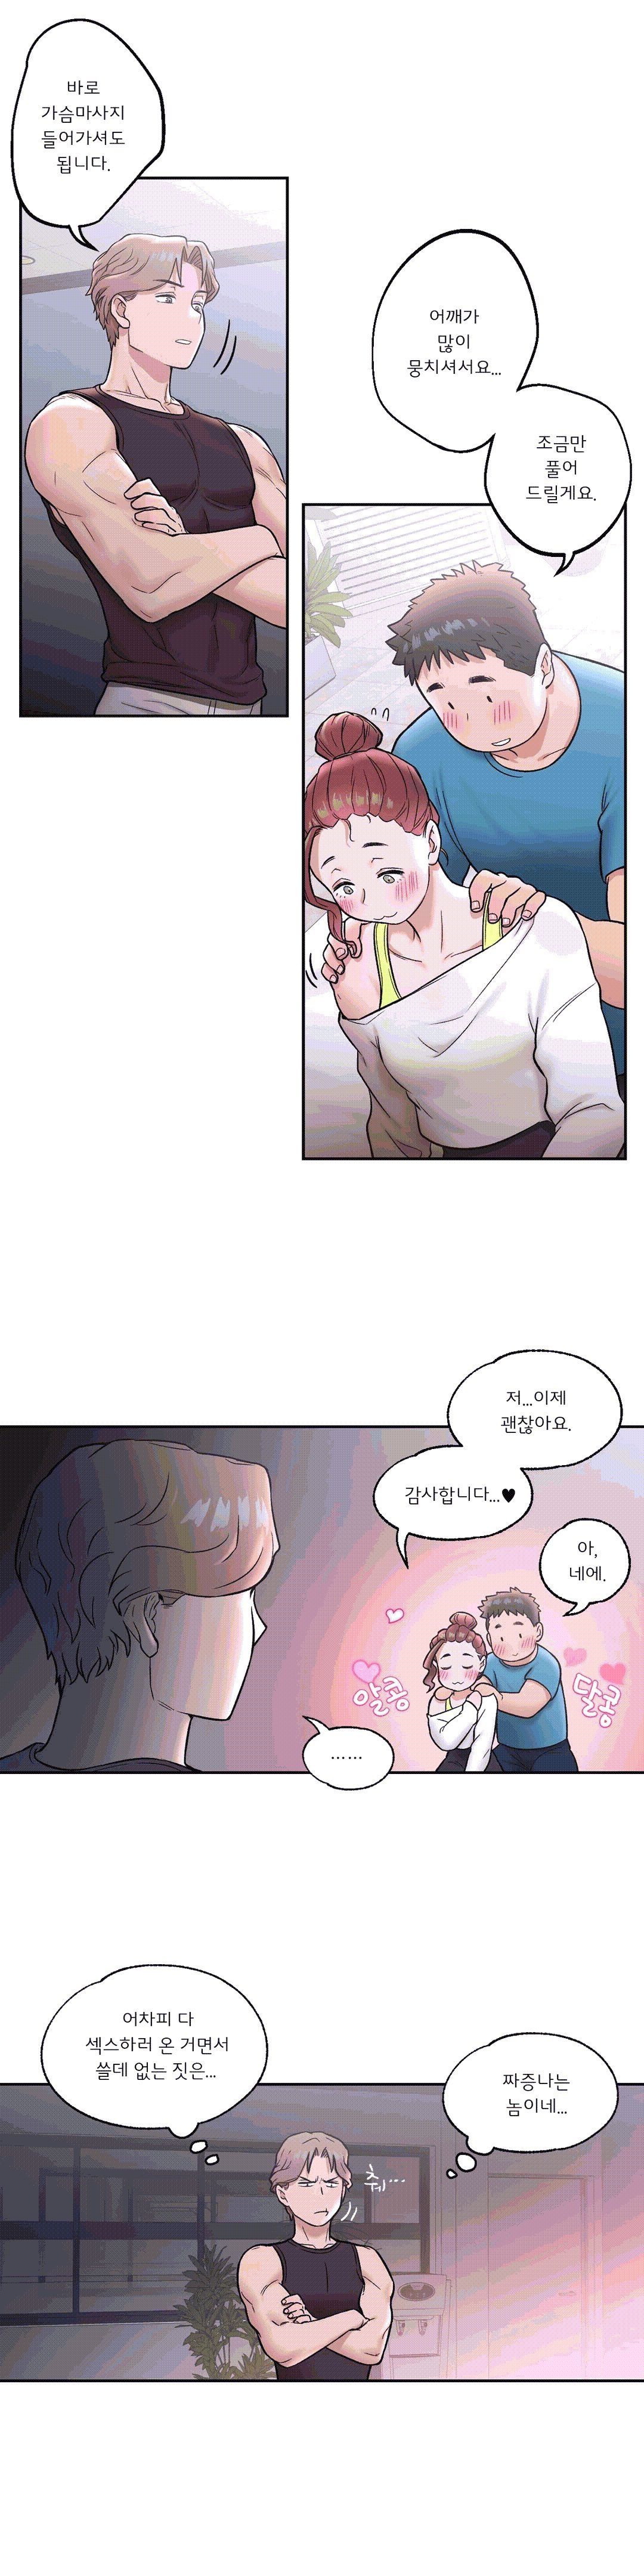 Sexercise Raw - Chapter 21 Page 4